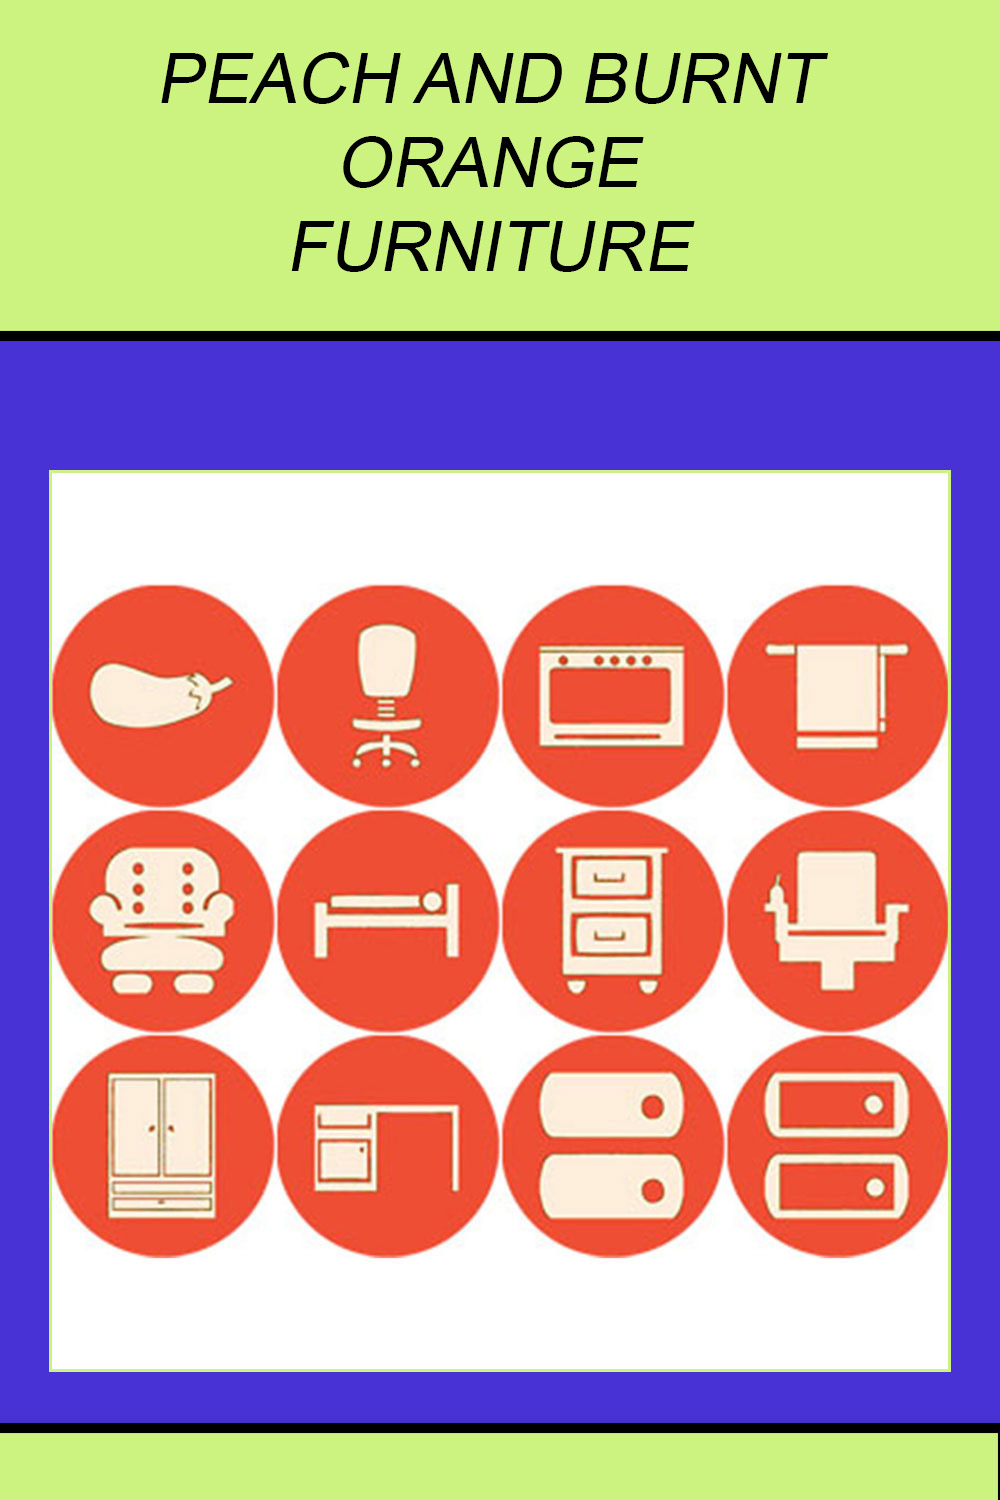 PEACH AND BURNT ORANGE FURNITURE ROUND ICONS pinterest preview image.